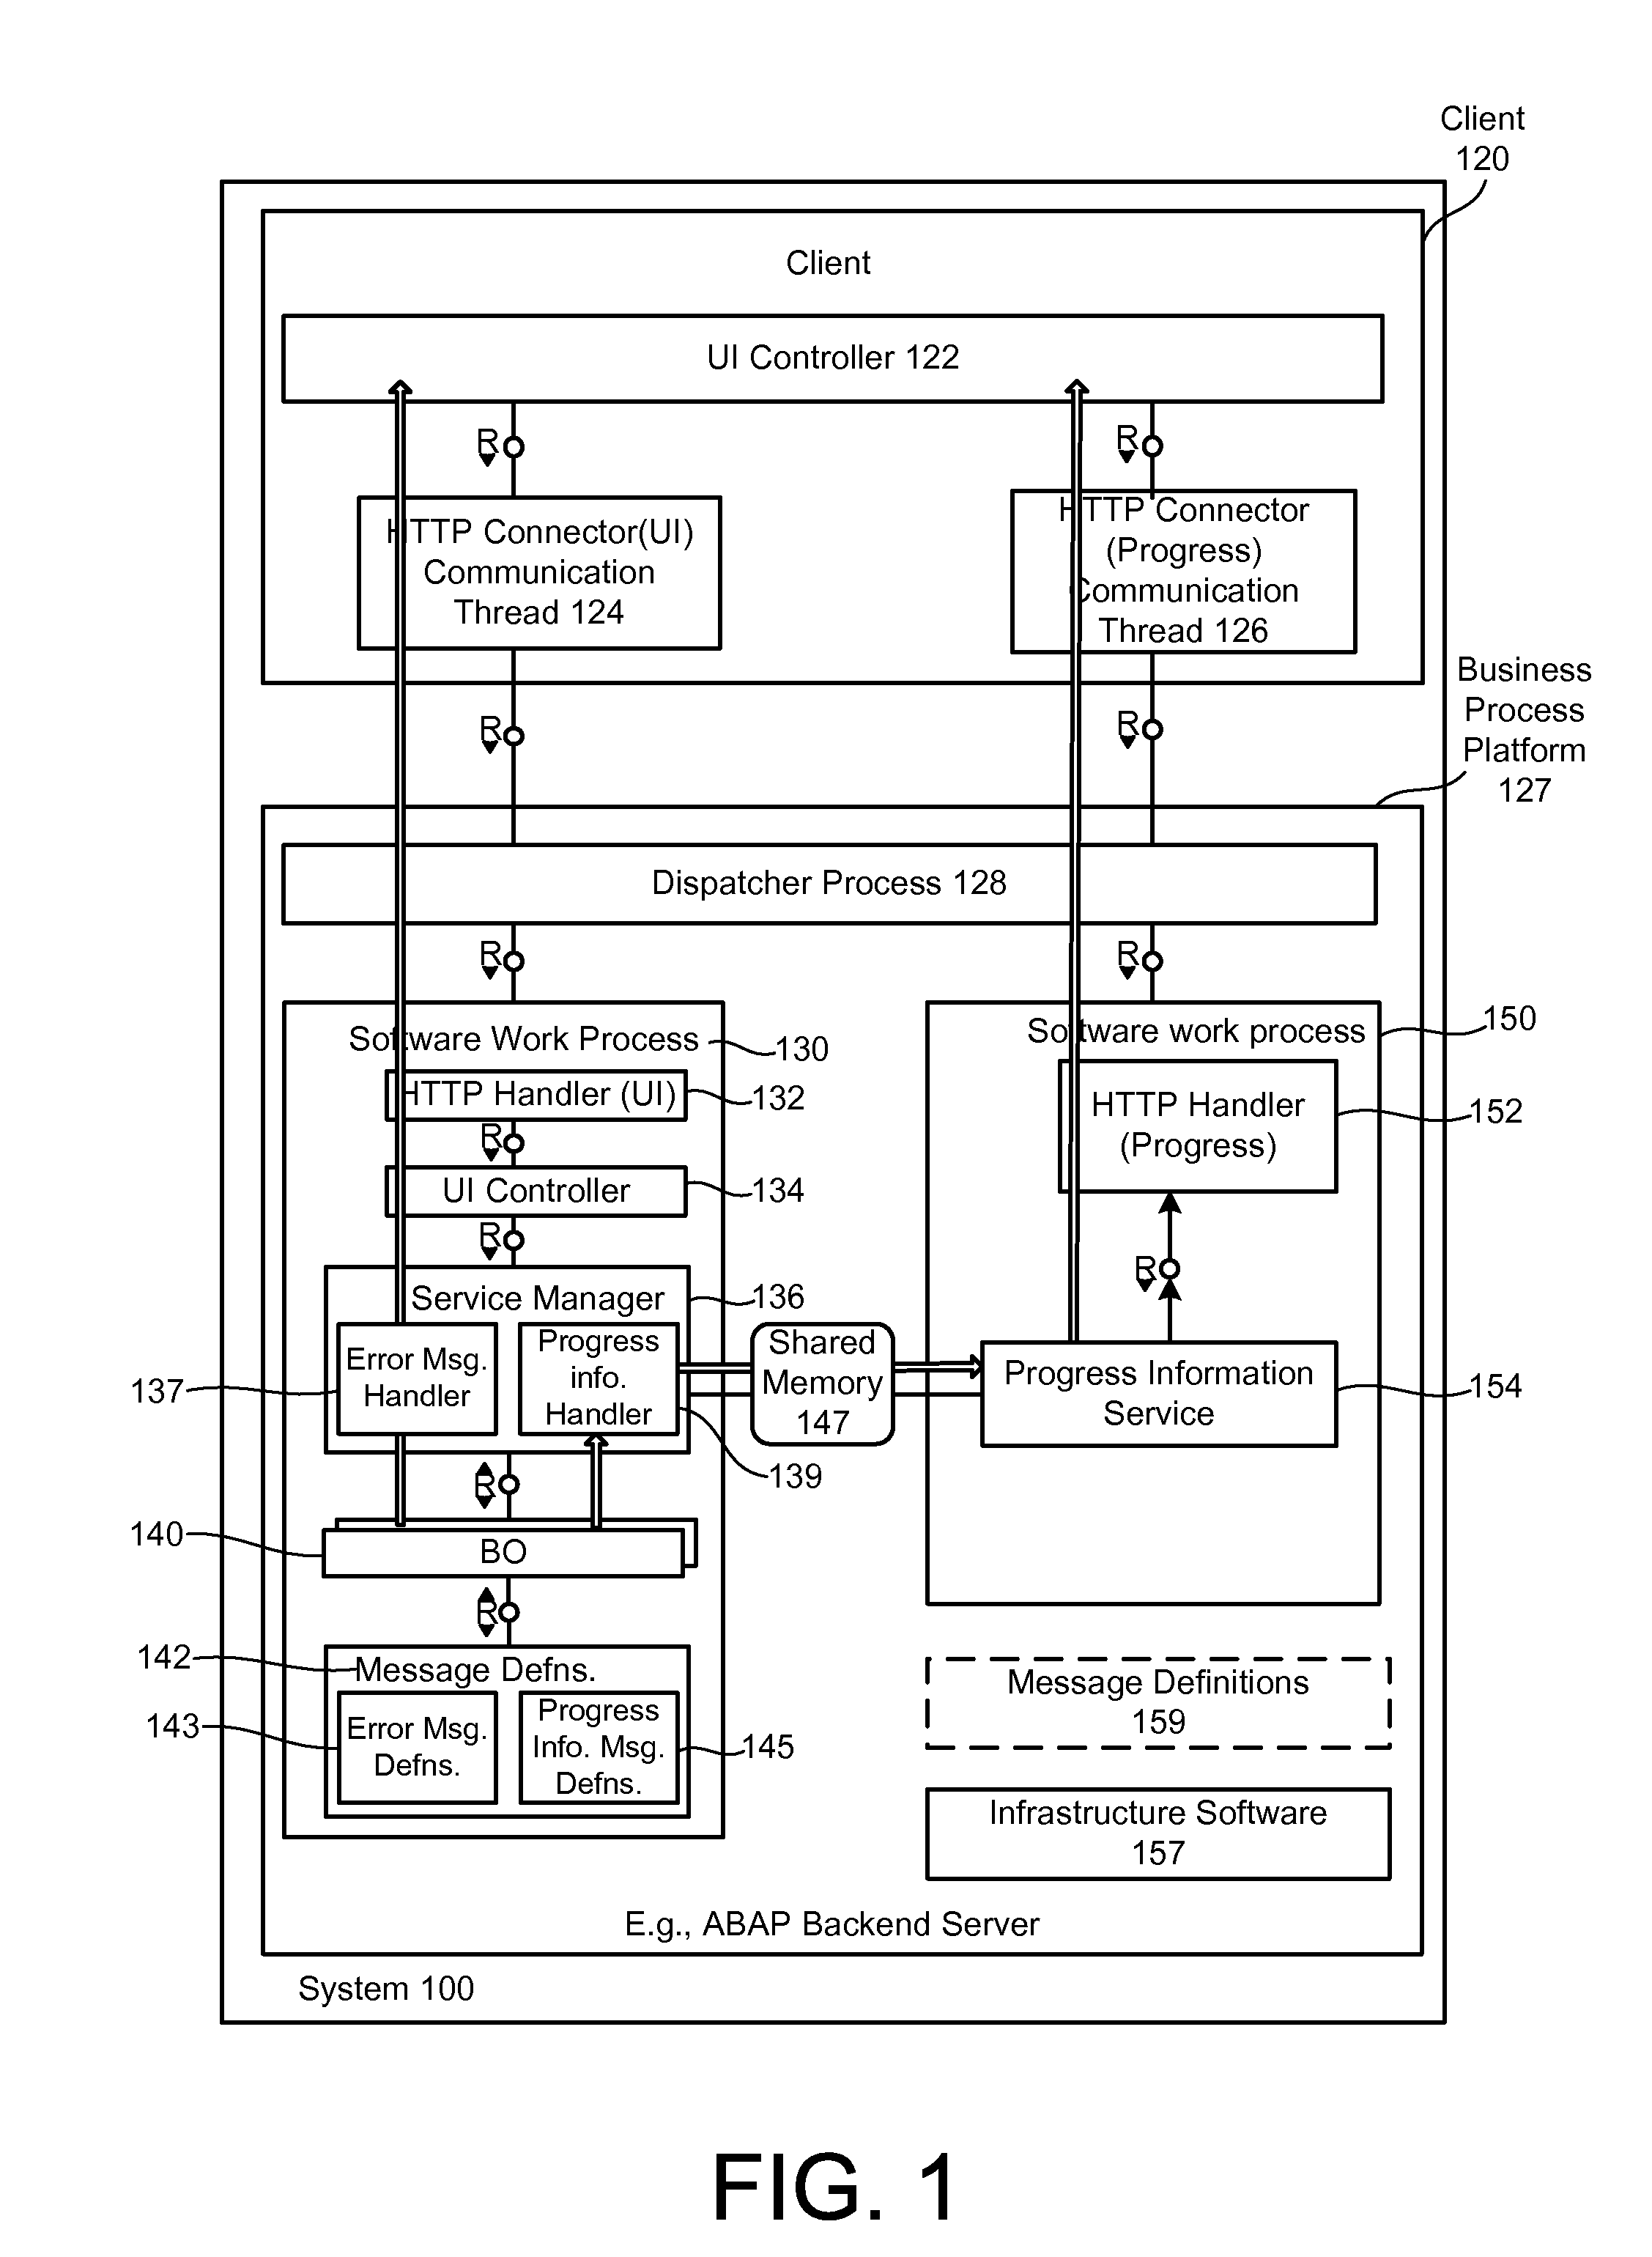 Generation of error messages and progress information messages via a common interface